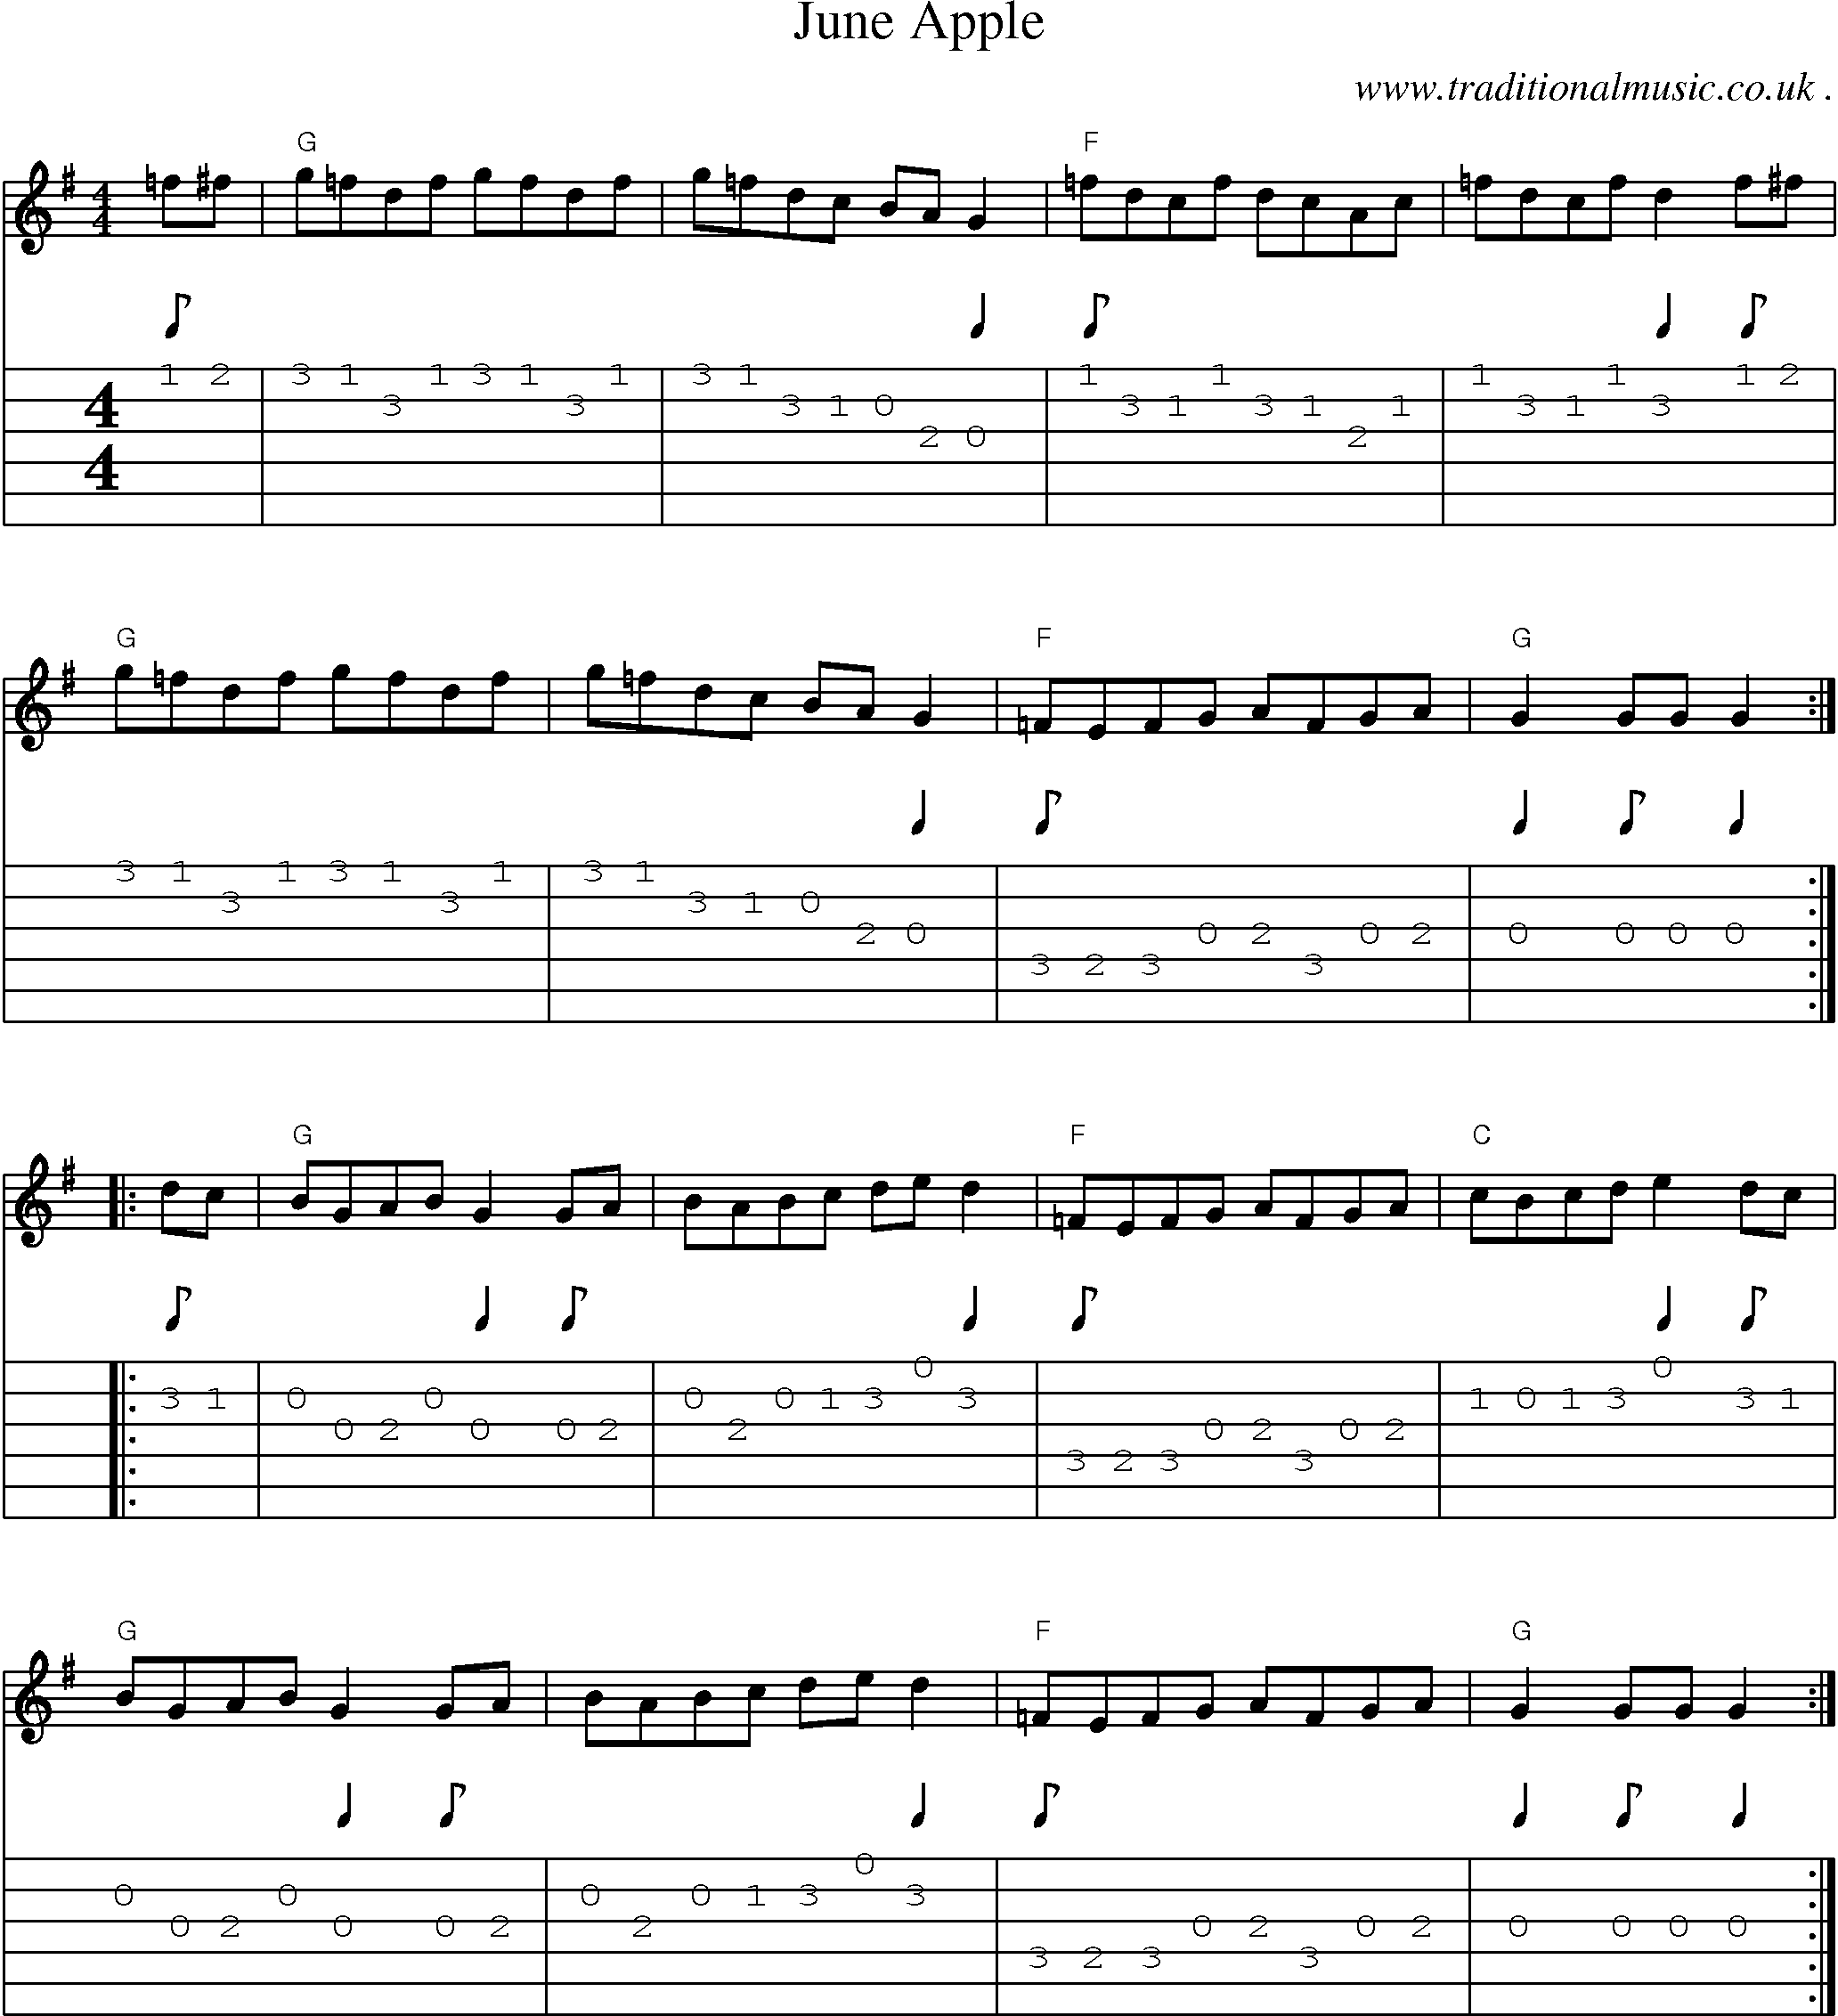 Music Score and Guitar Tabs for June Apple